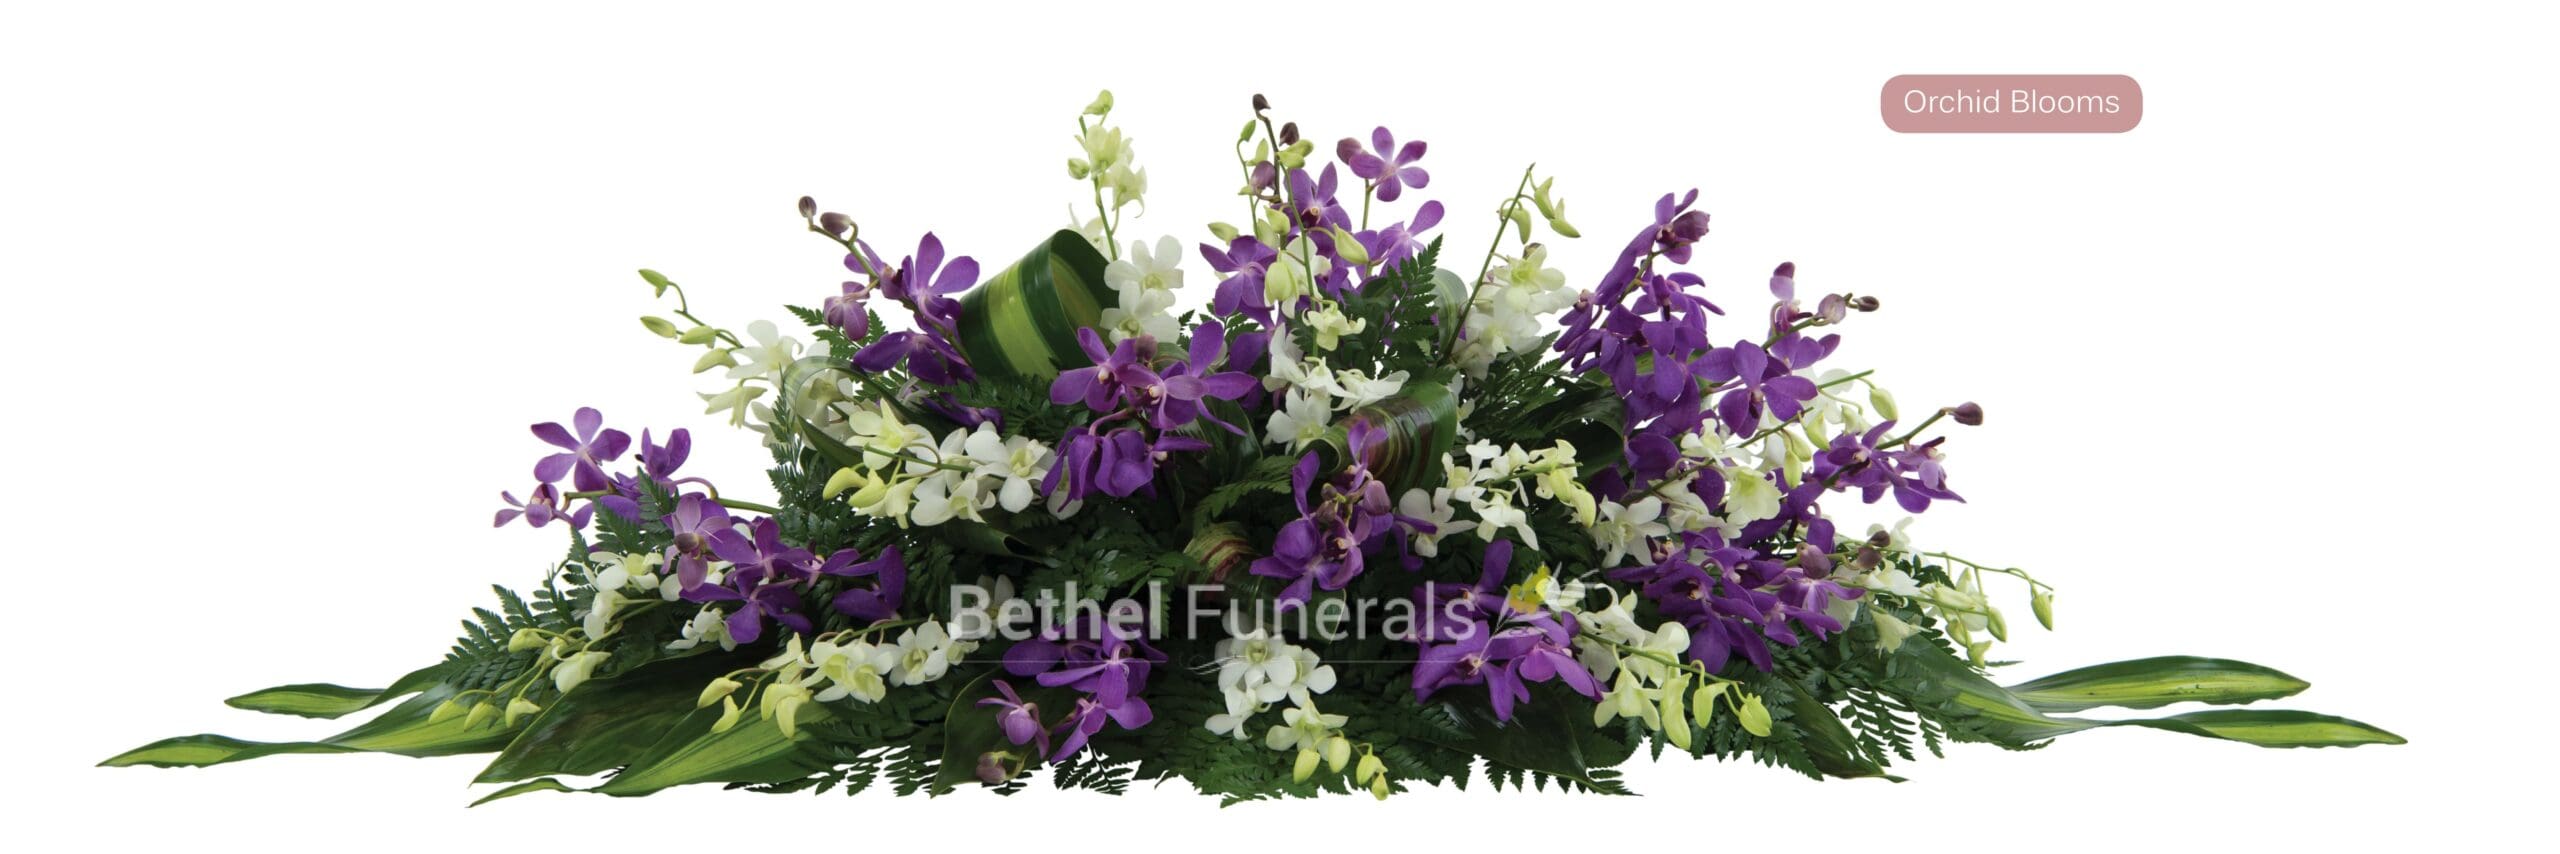 Orchid Blooms funeral flowers